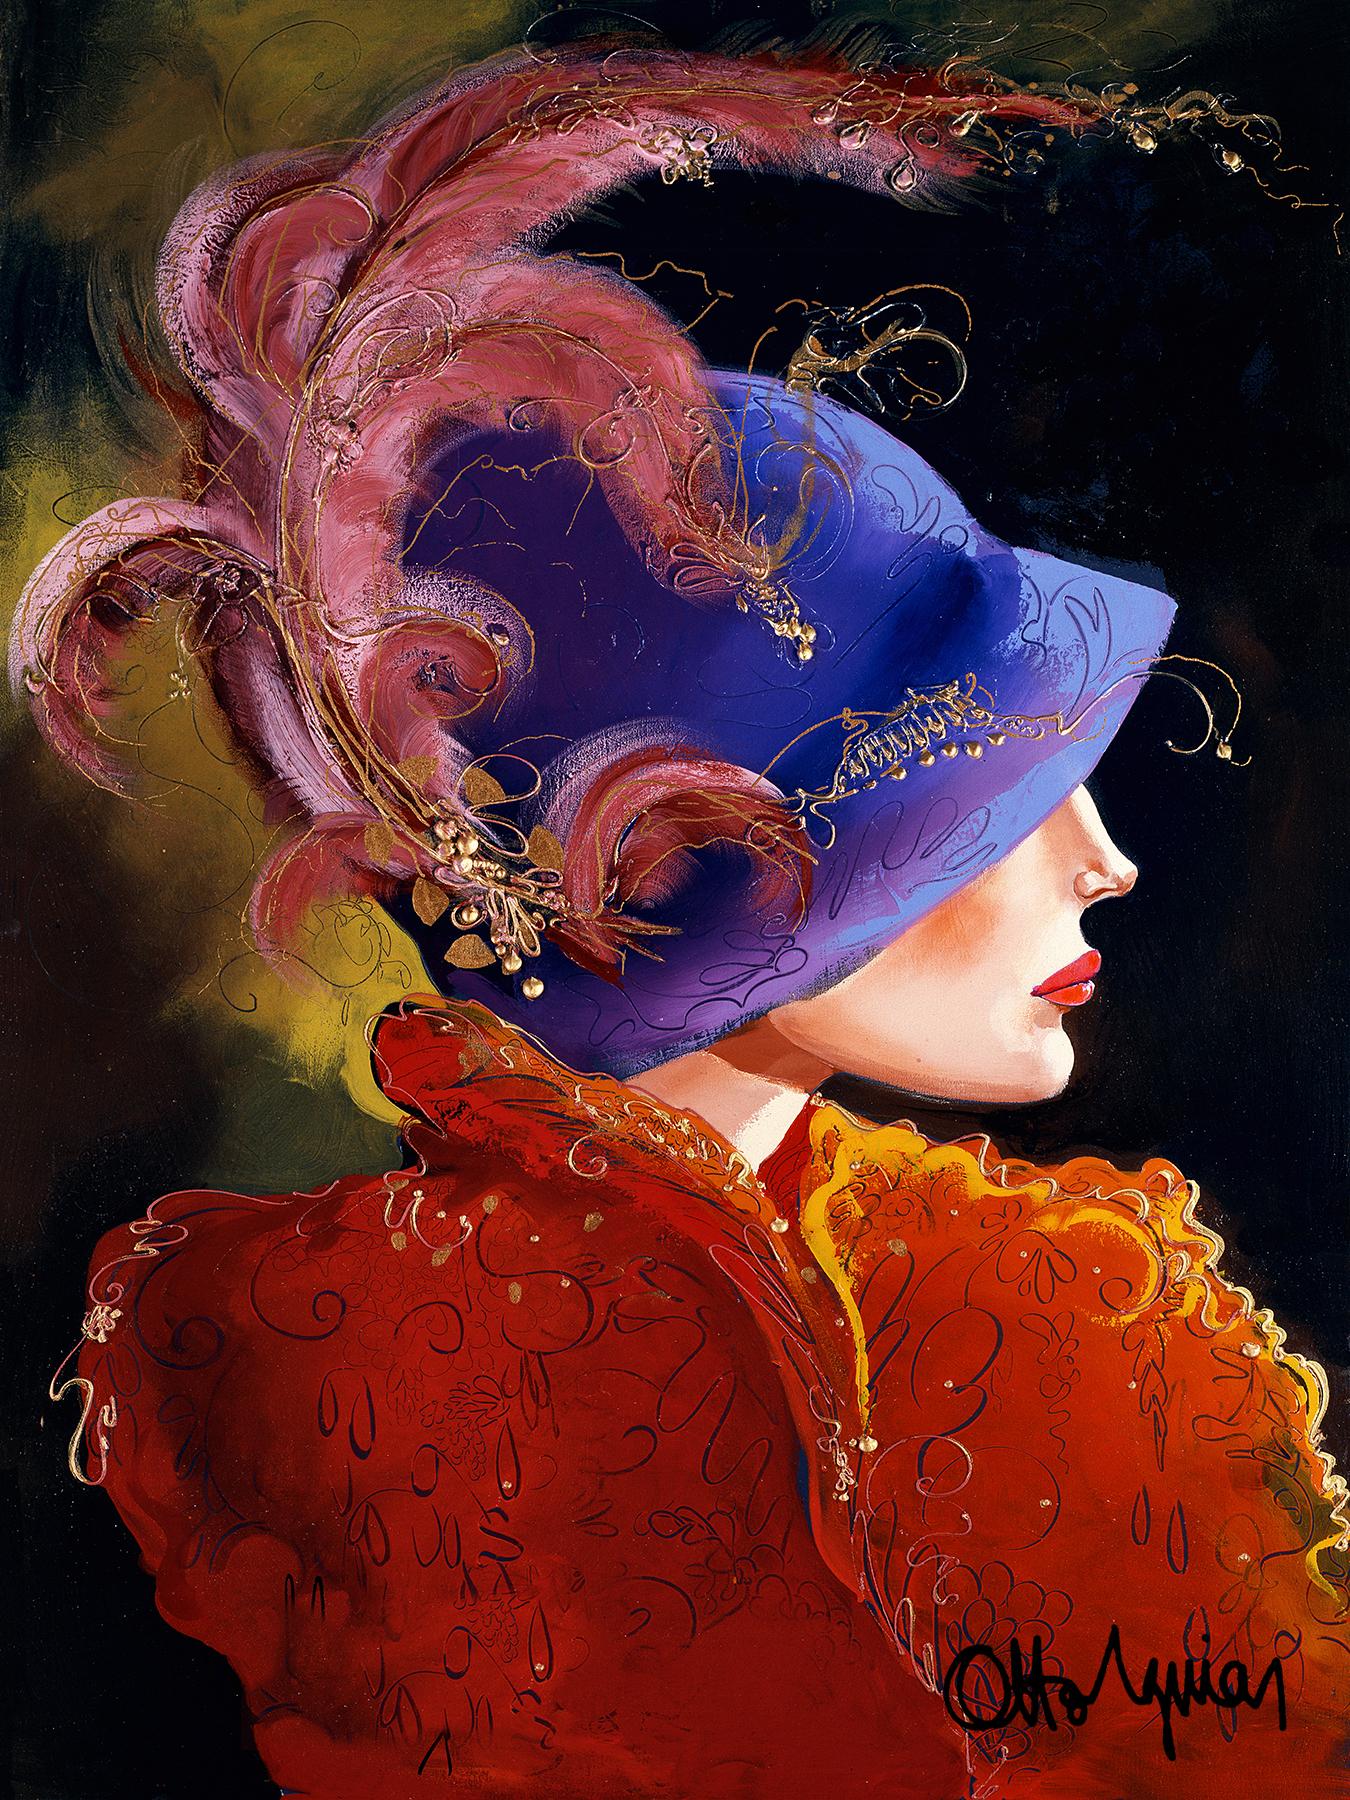 A striking female figure in profile. Dramatic black background, in sharp contrast with the porcelain, chiseled features, inspired by the artist’s lovely daughter as a child. Vibrant red, magenta, and purple hues, flamboyant plumage. Angelika has